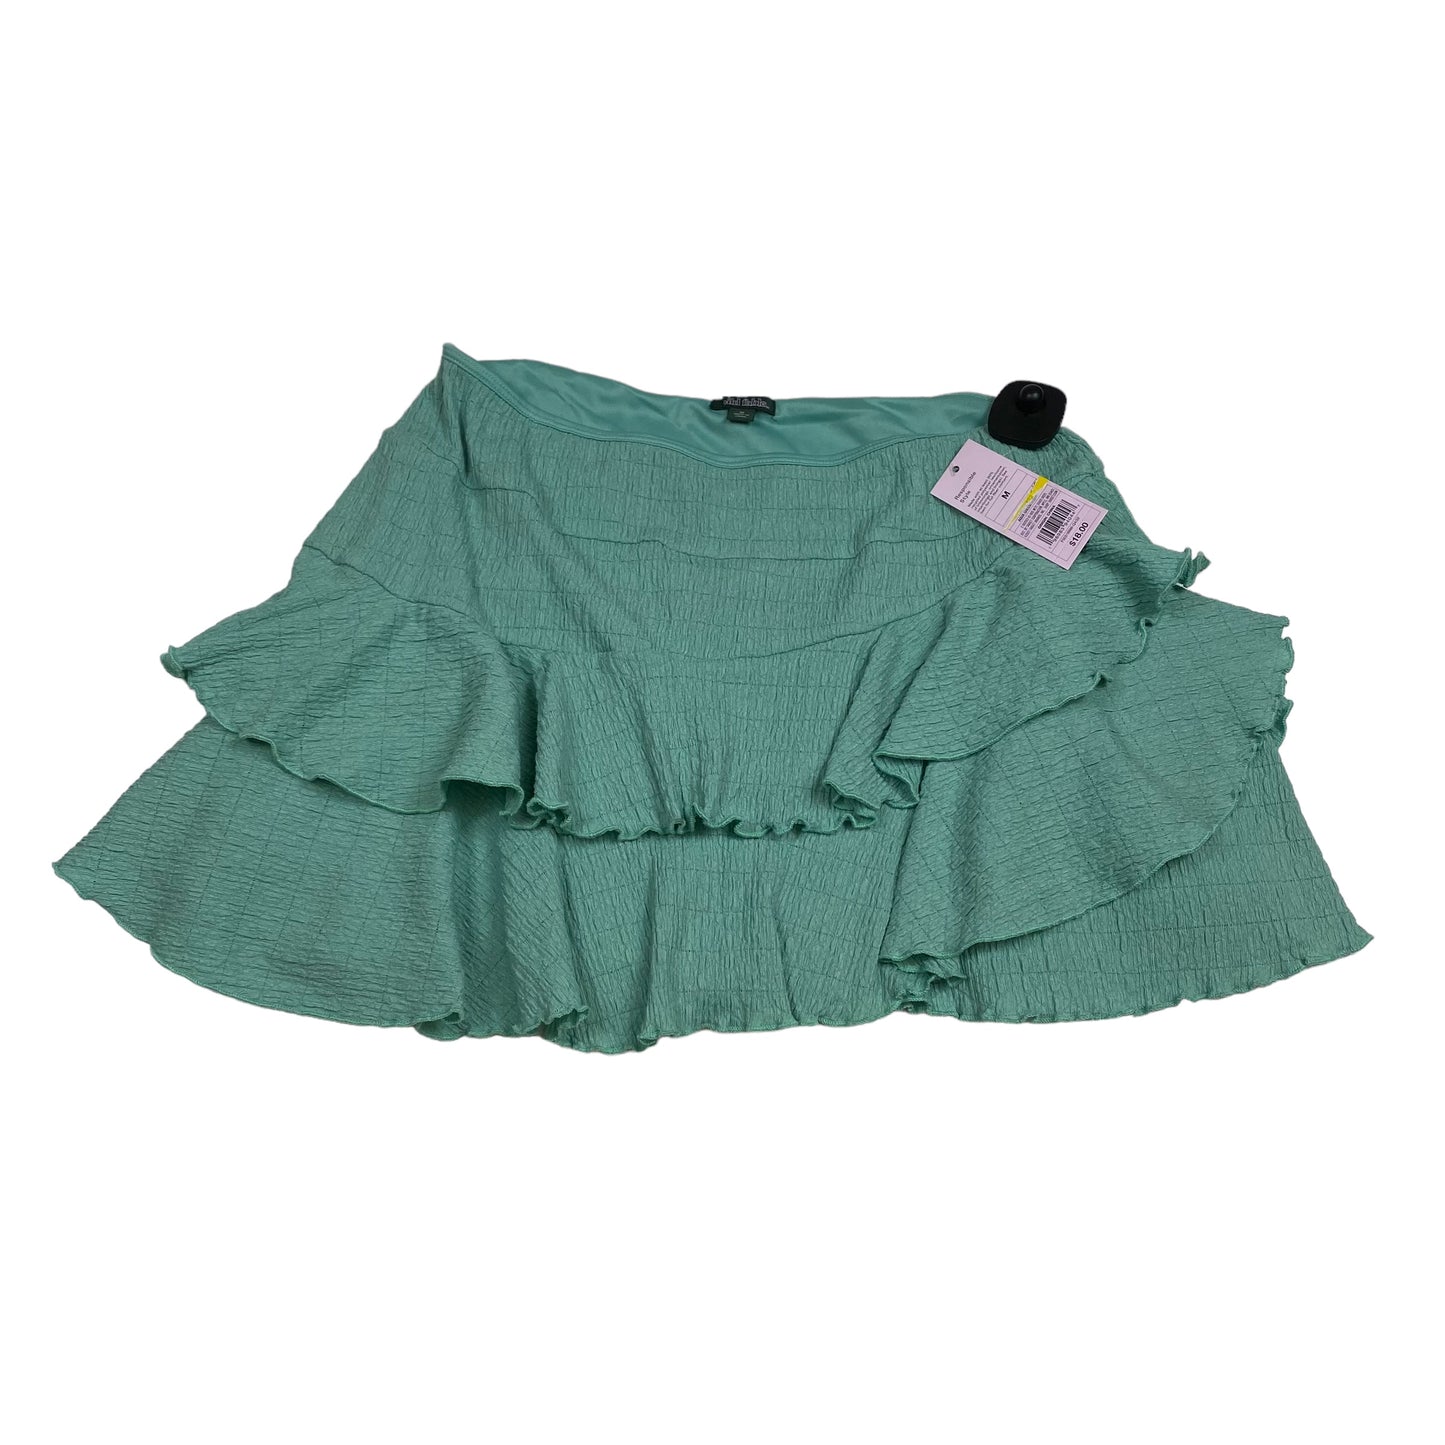 Skirt Mini & Short By Wild Fable  Size: M